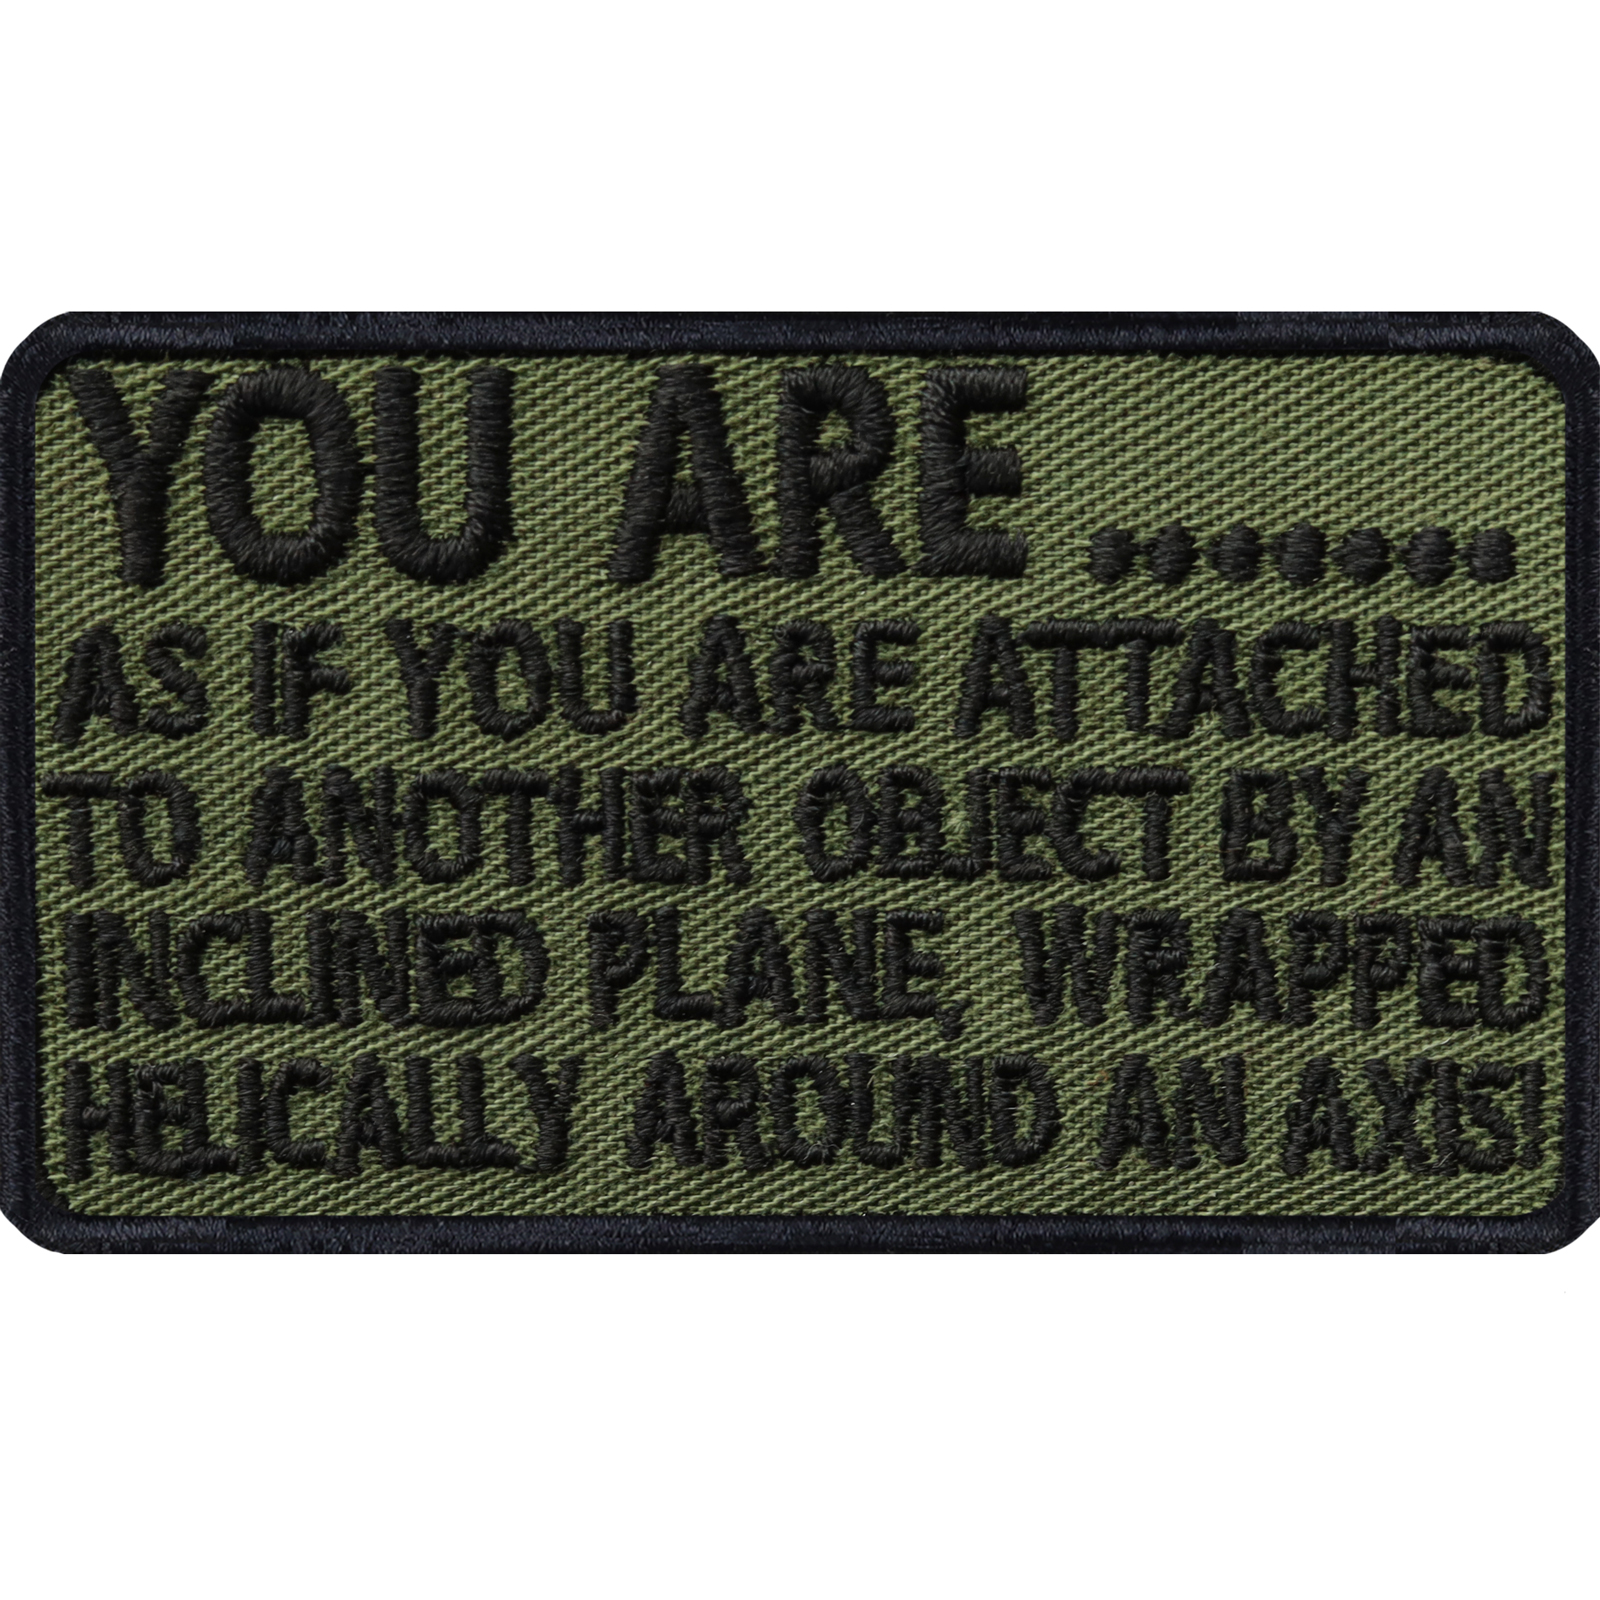 You are... as if you are attached to another object by an inclined plane, wrapped helically around an axis - Patch